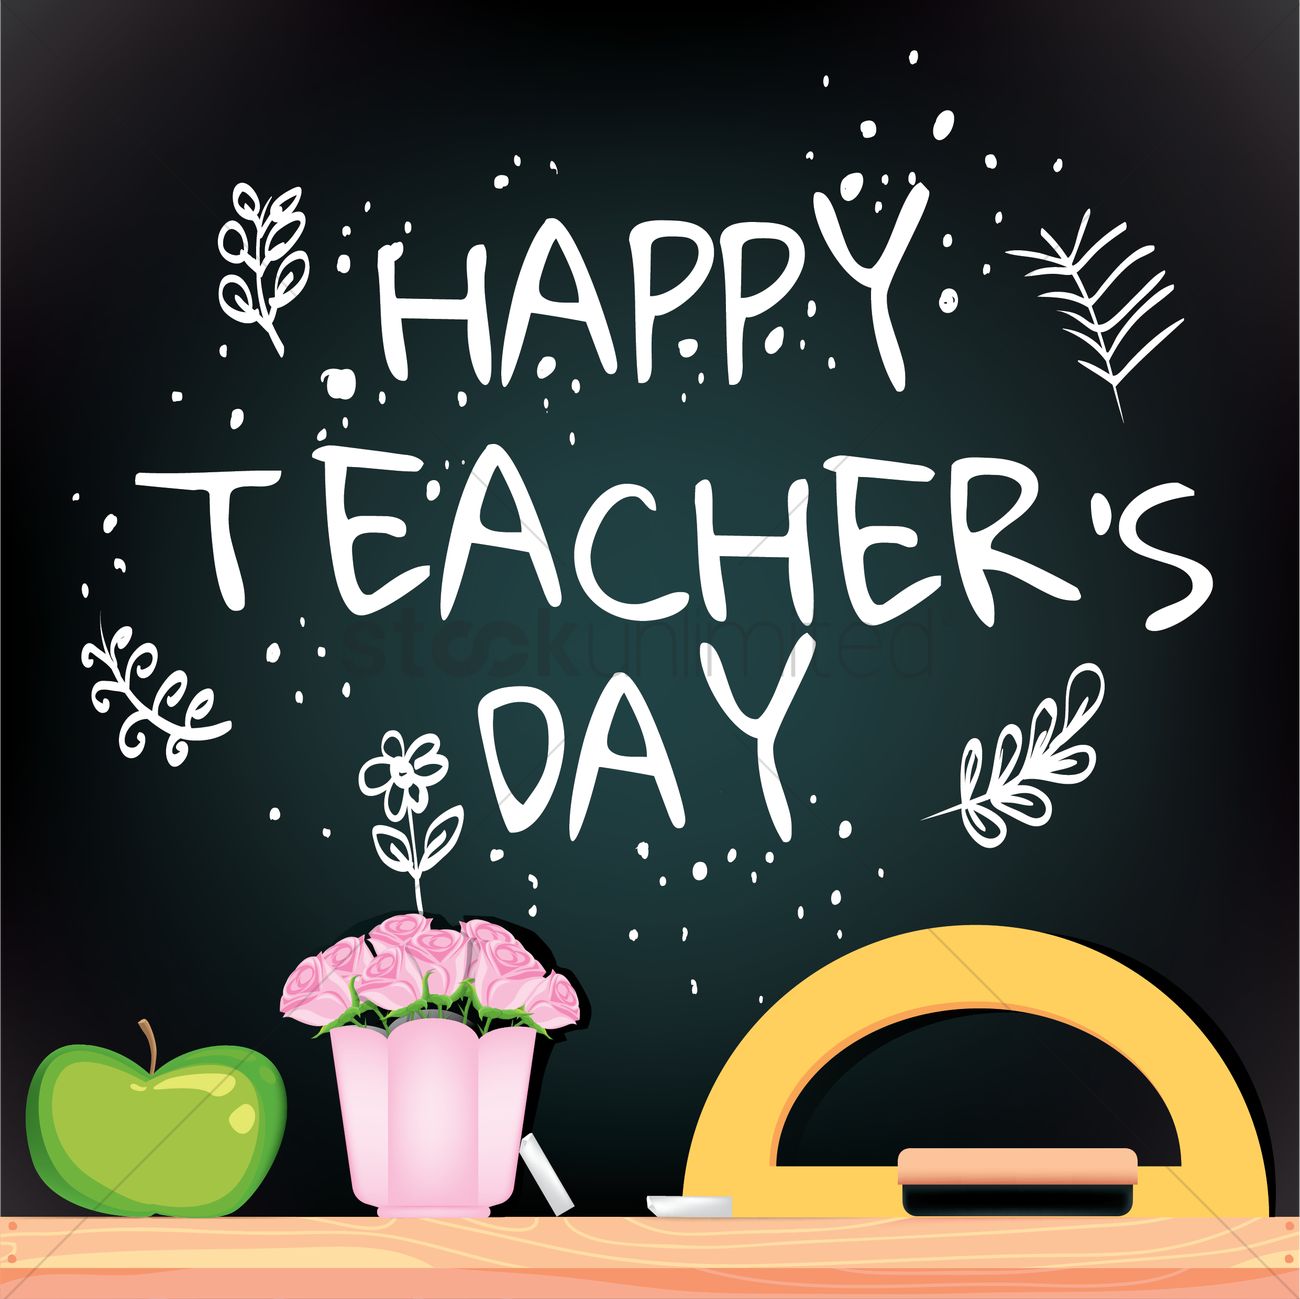 Happy Teachers Day Quotes and Images with Sayings 2022